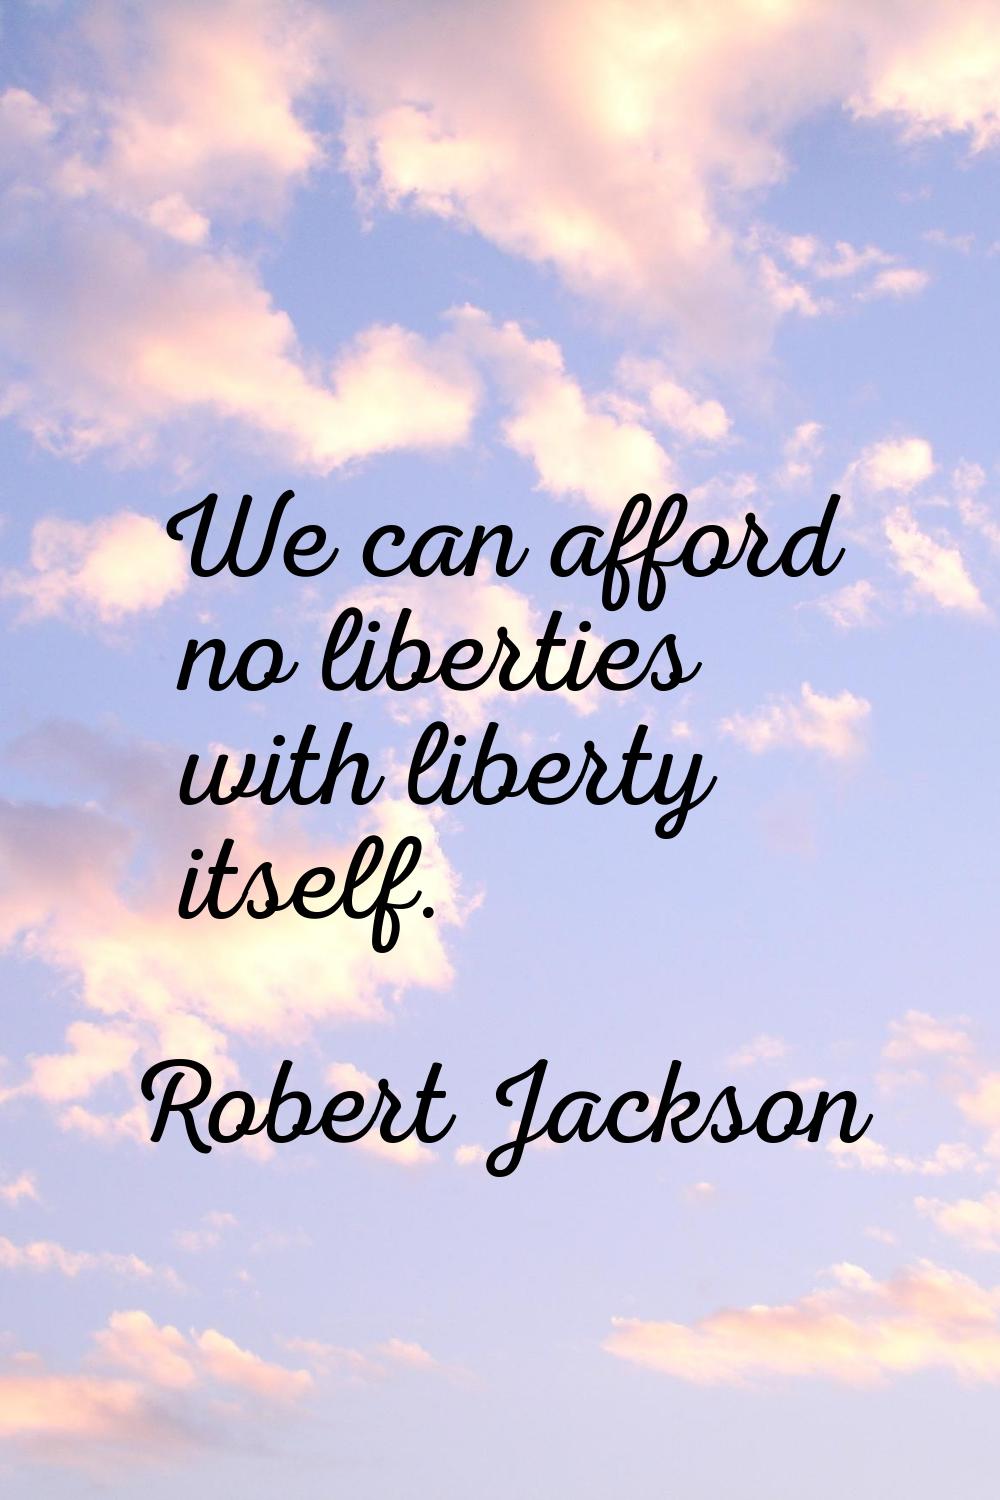 We can afford no liberties with liberty itself.